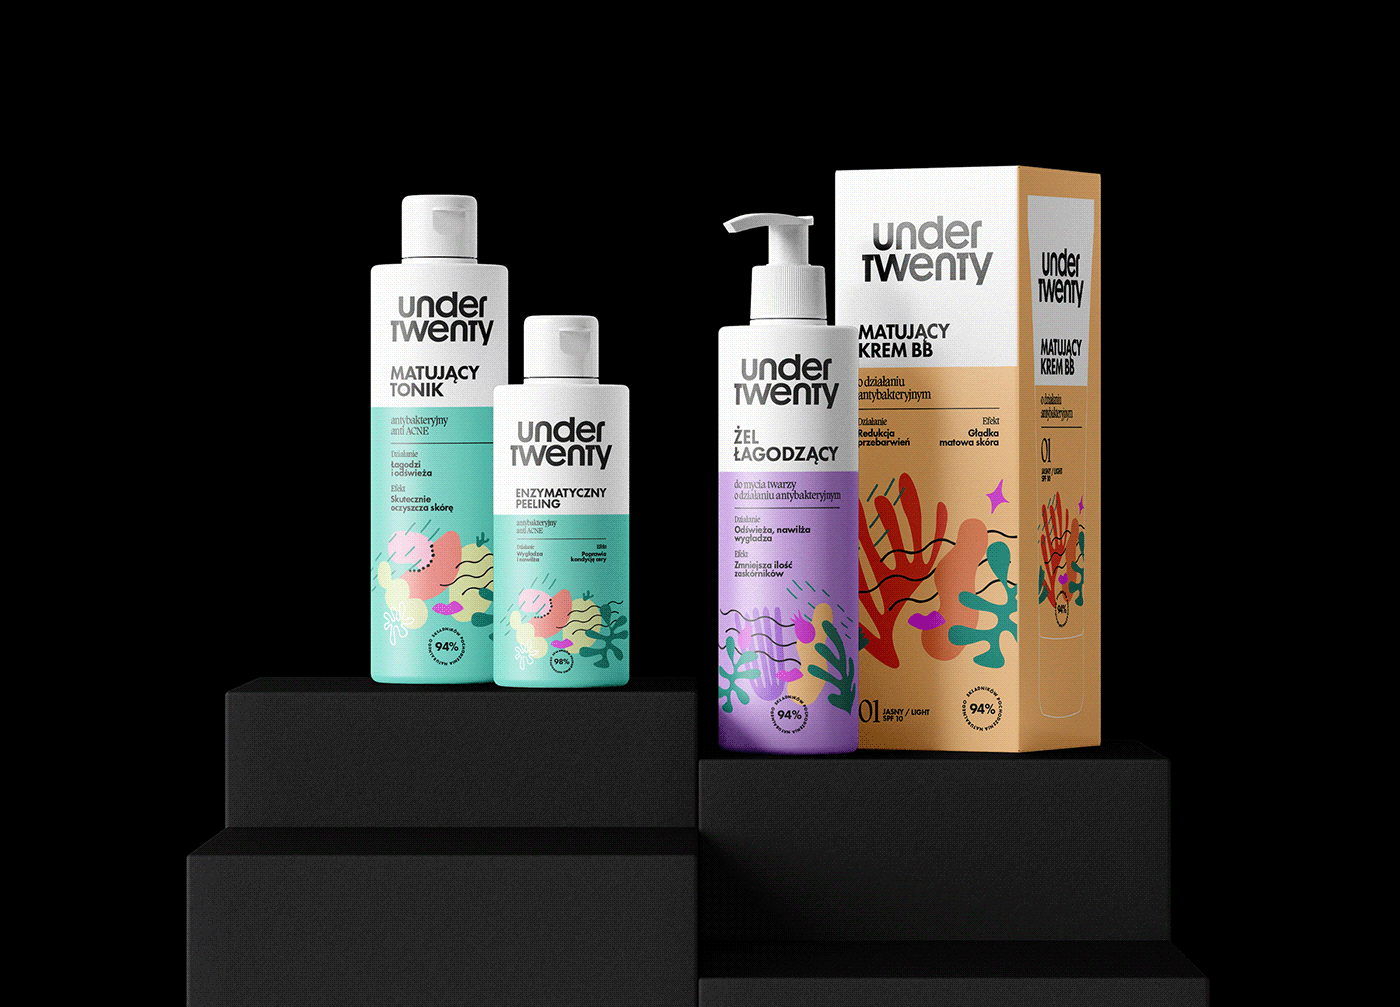 acne beauty brand identity care cosmetics key visual Packaging packaging design skin skincare